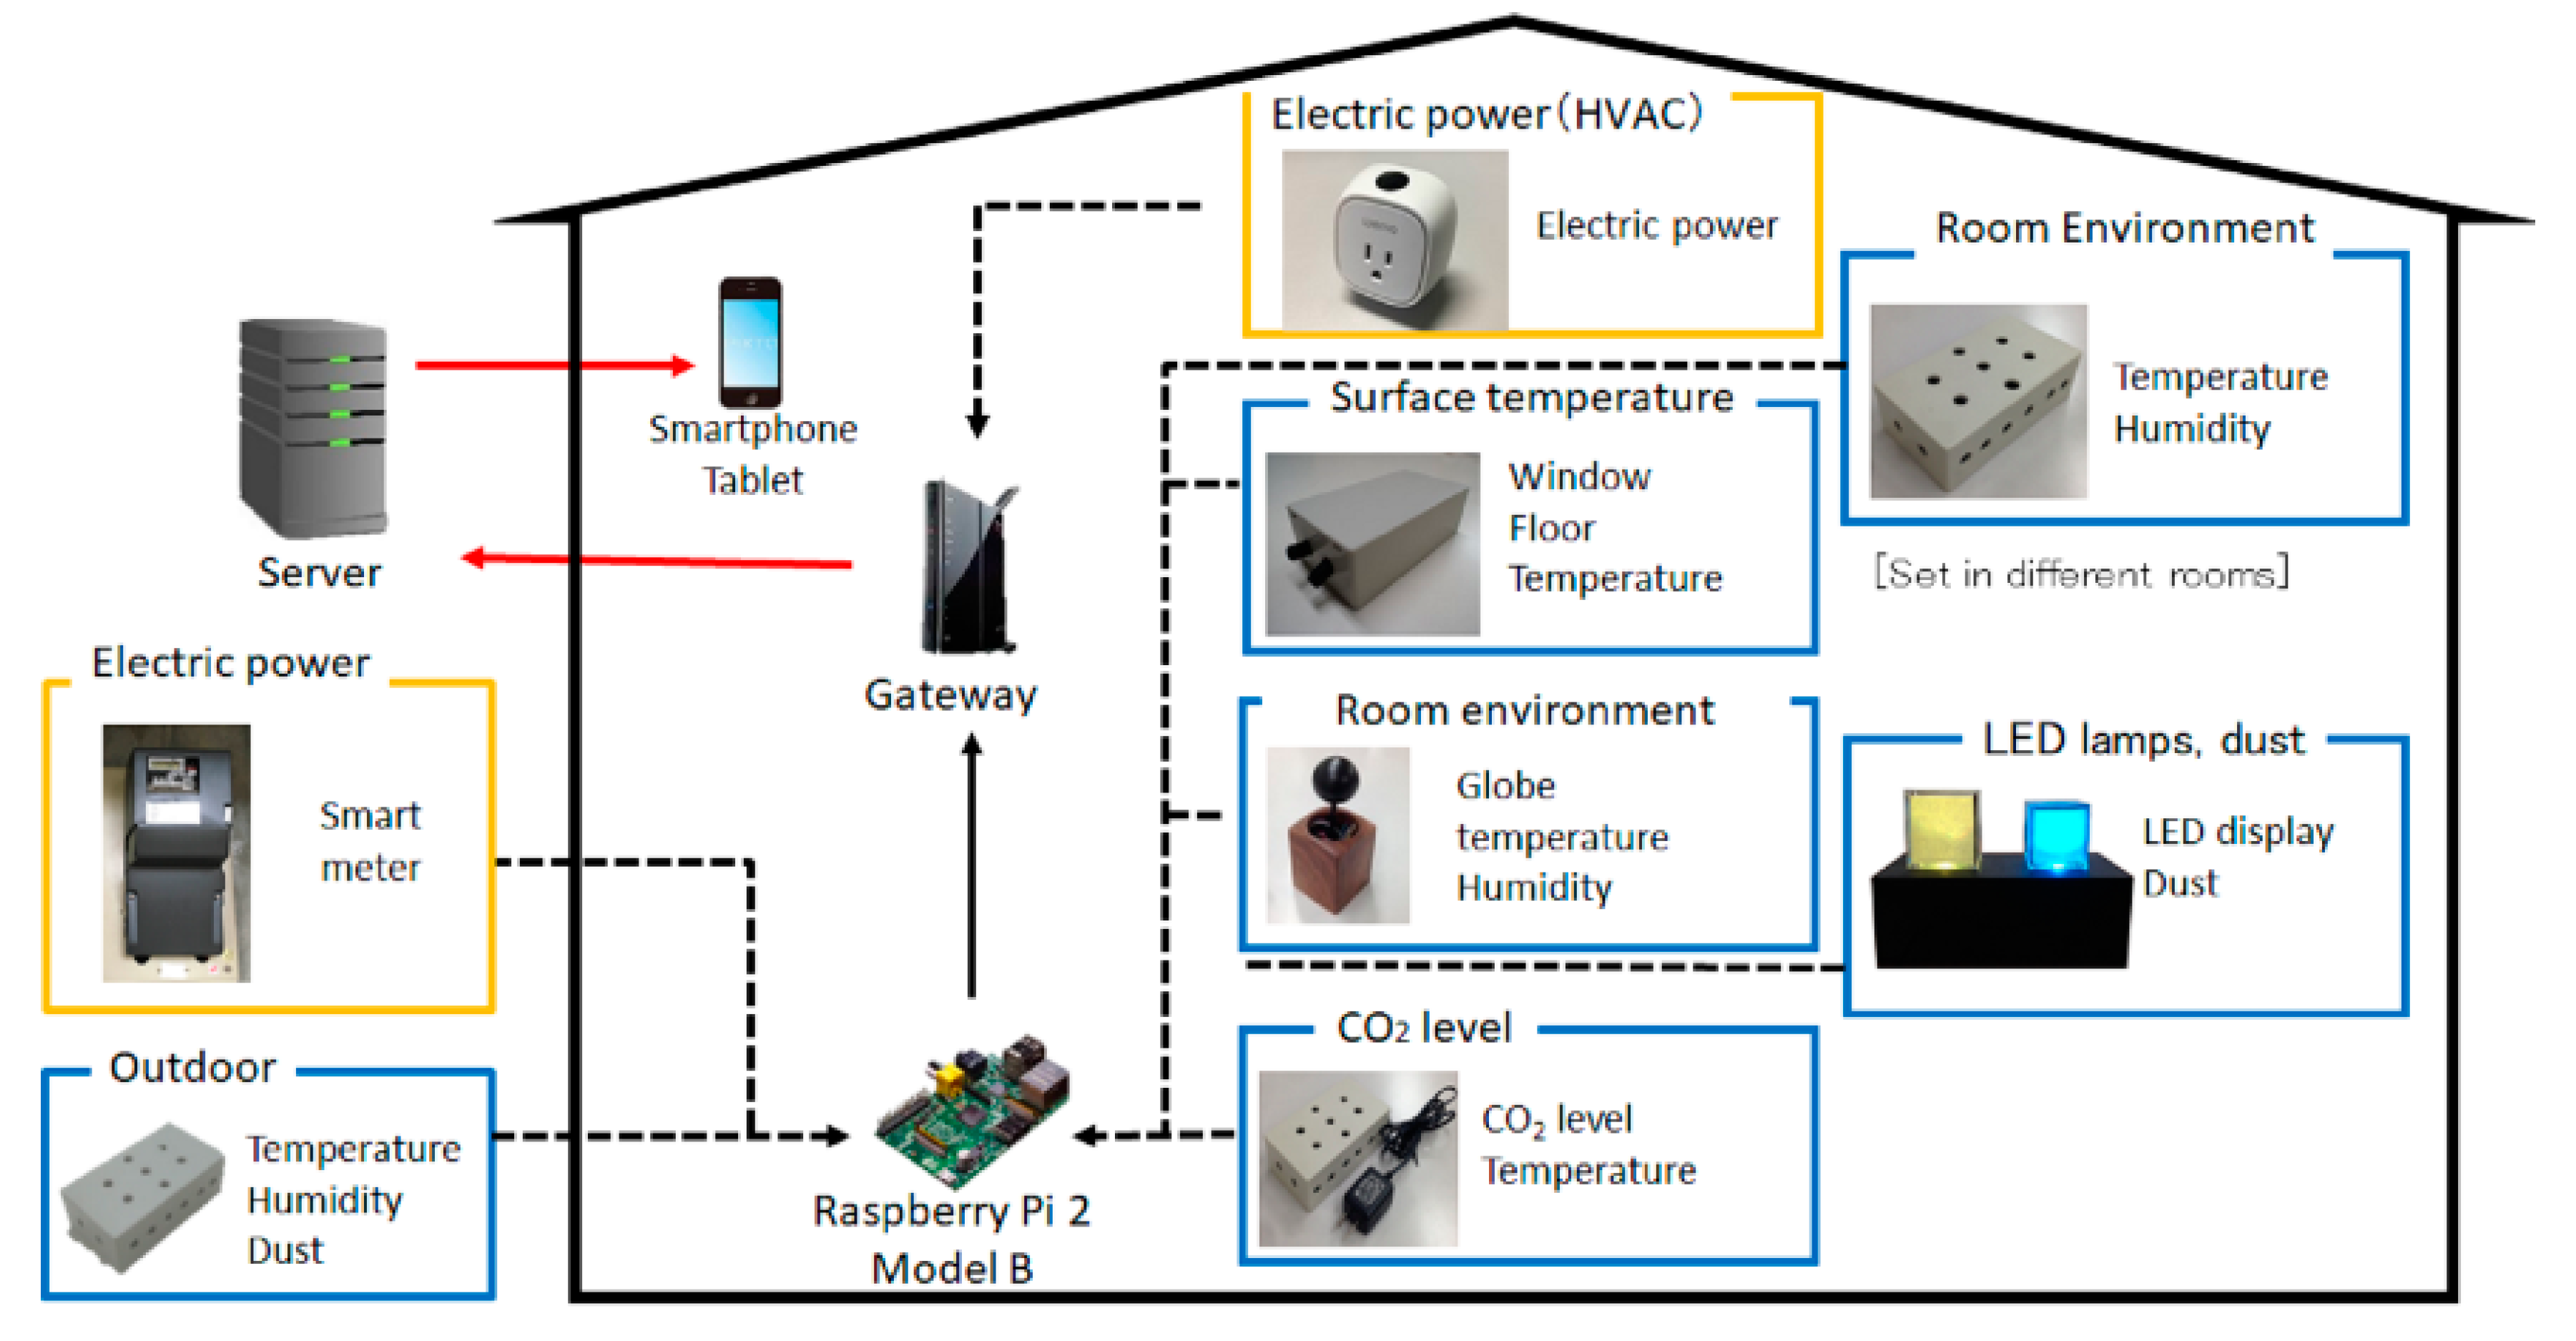 Energies Free Full Text Estimation Of Building Thermal Performance Using Simple Sensors And Air Conditioners Html